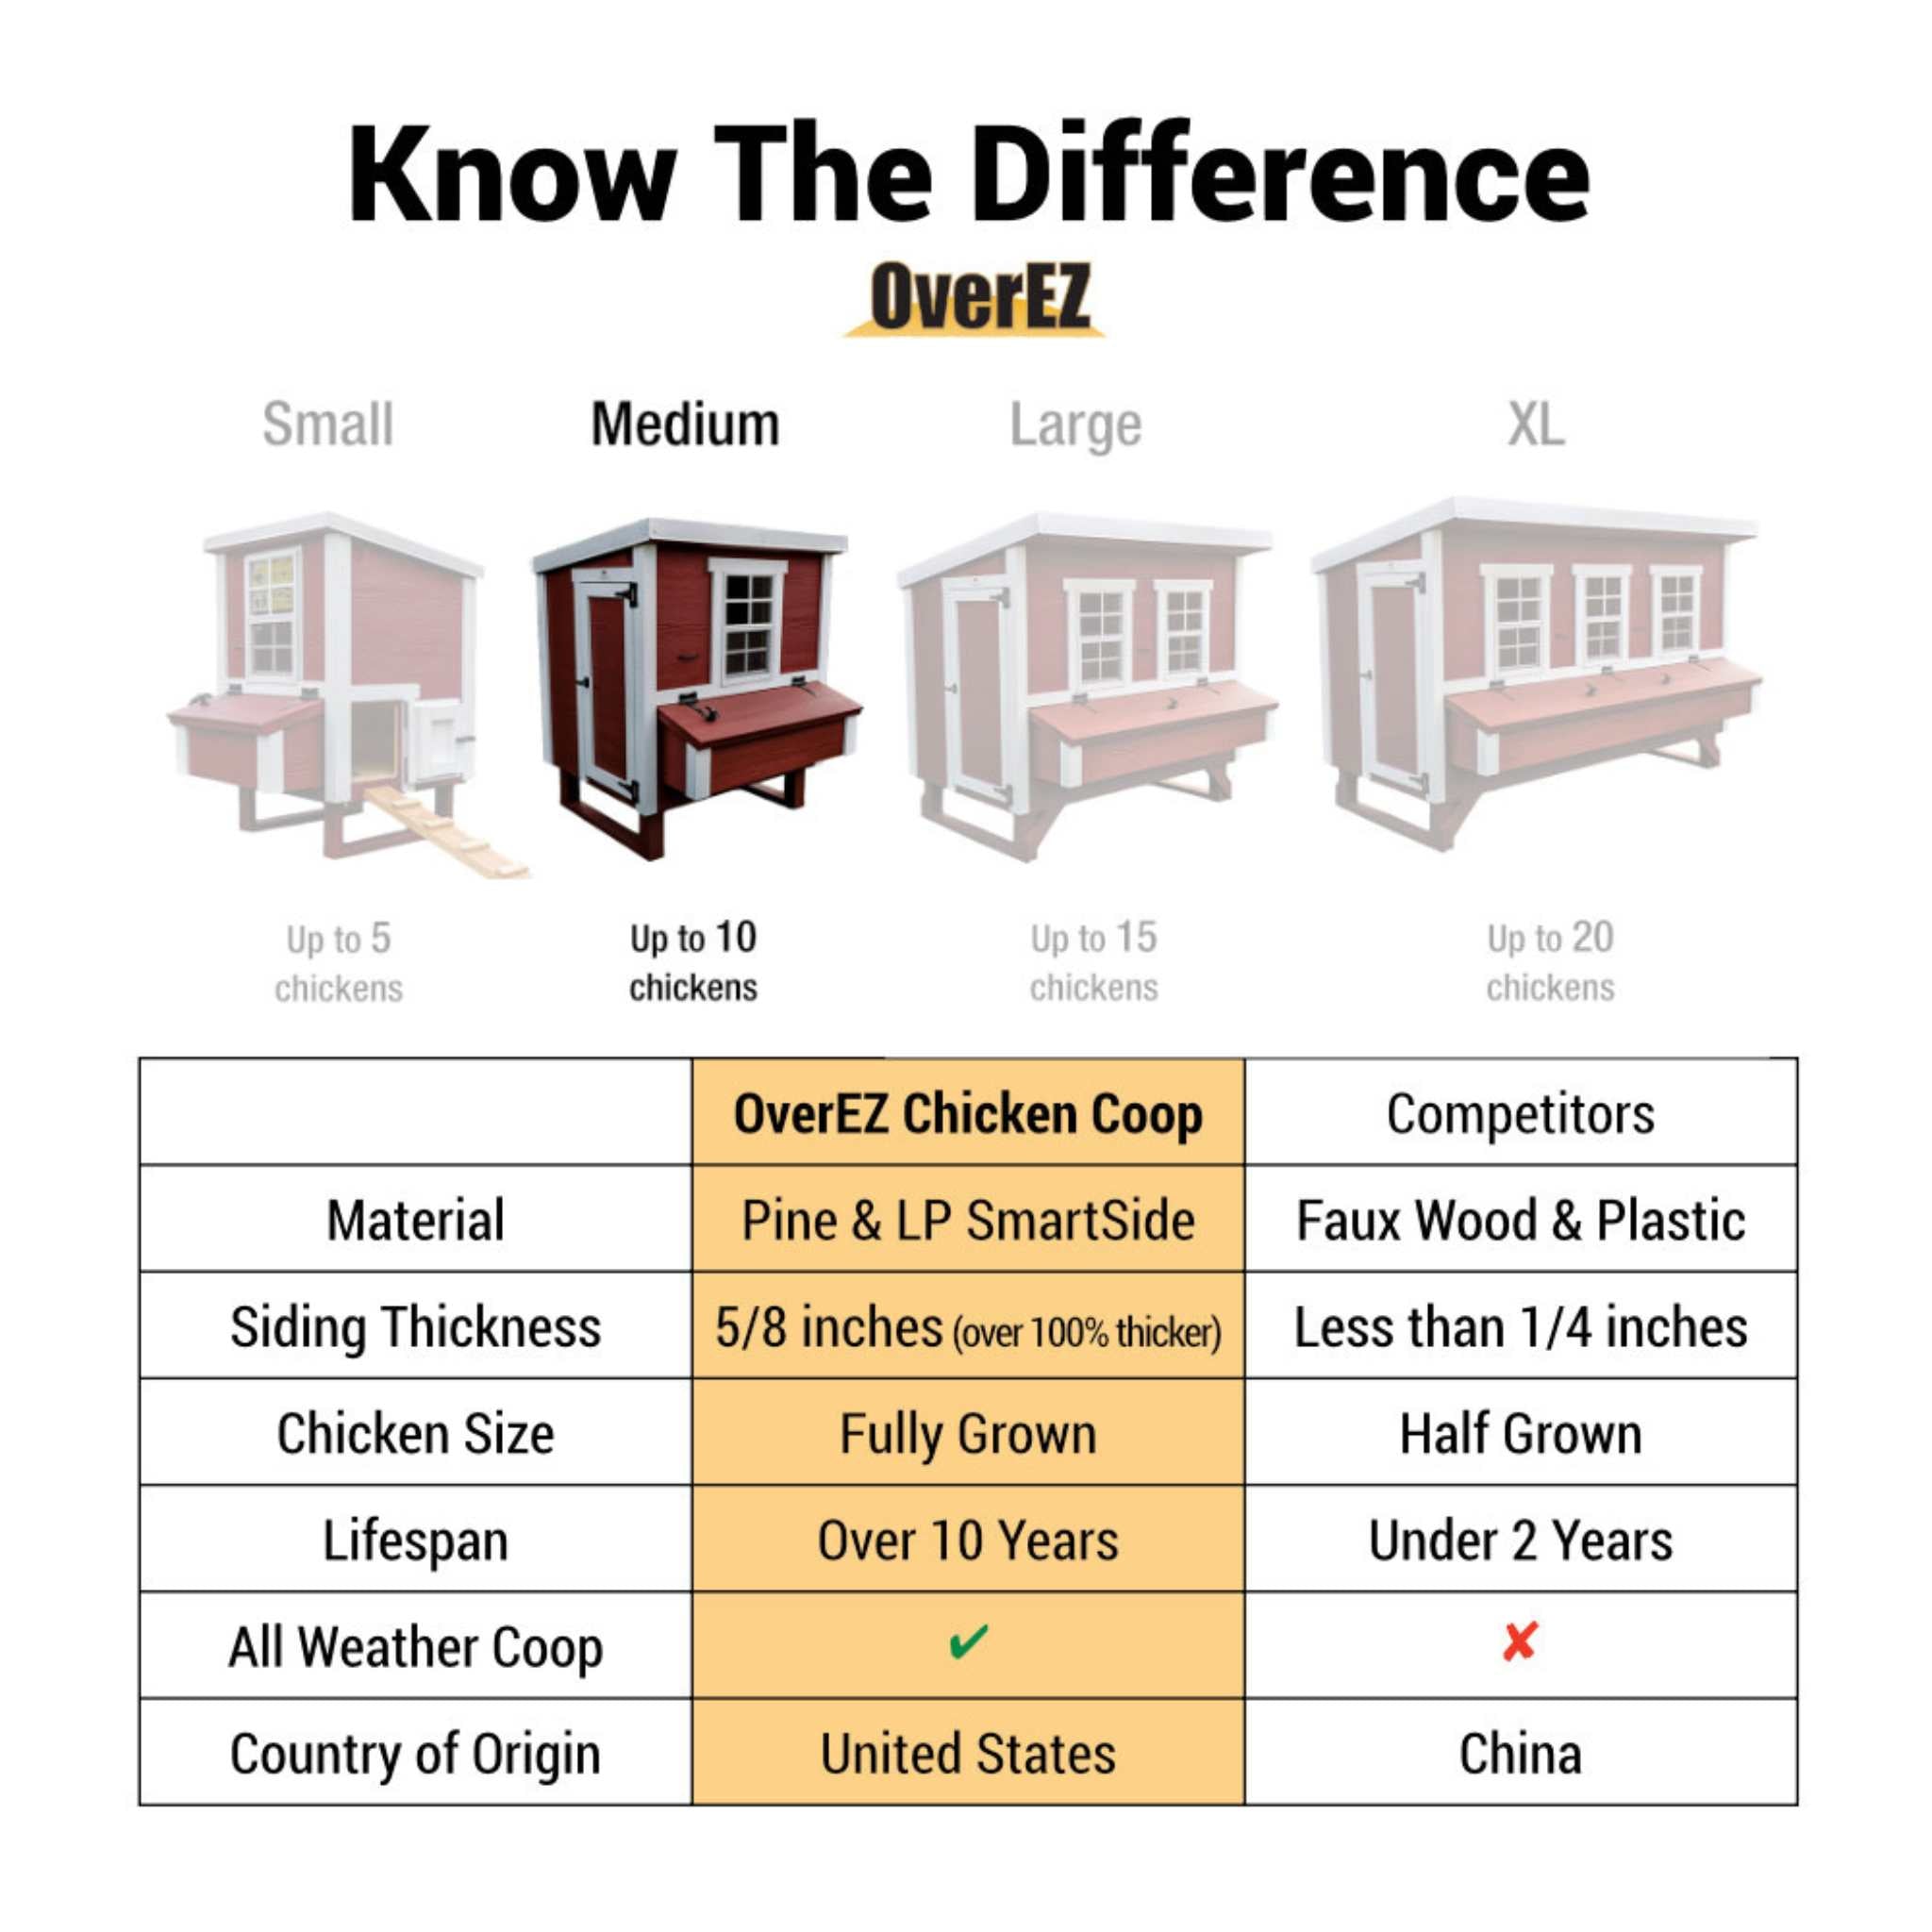 Hatching Time OverEZ. Medium chicken coop is highlighted in infographic. Medium chicken coop is made with Pine and LP SmartSide material,  is 5/8 of an inch thick for fully grown chickens and can last over 10 years.